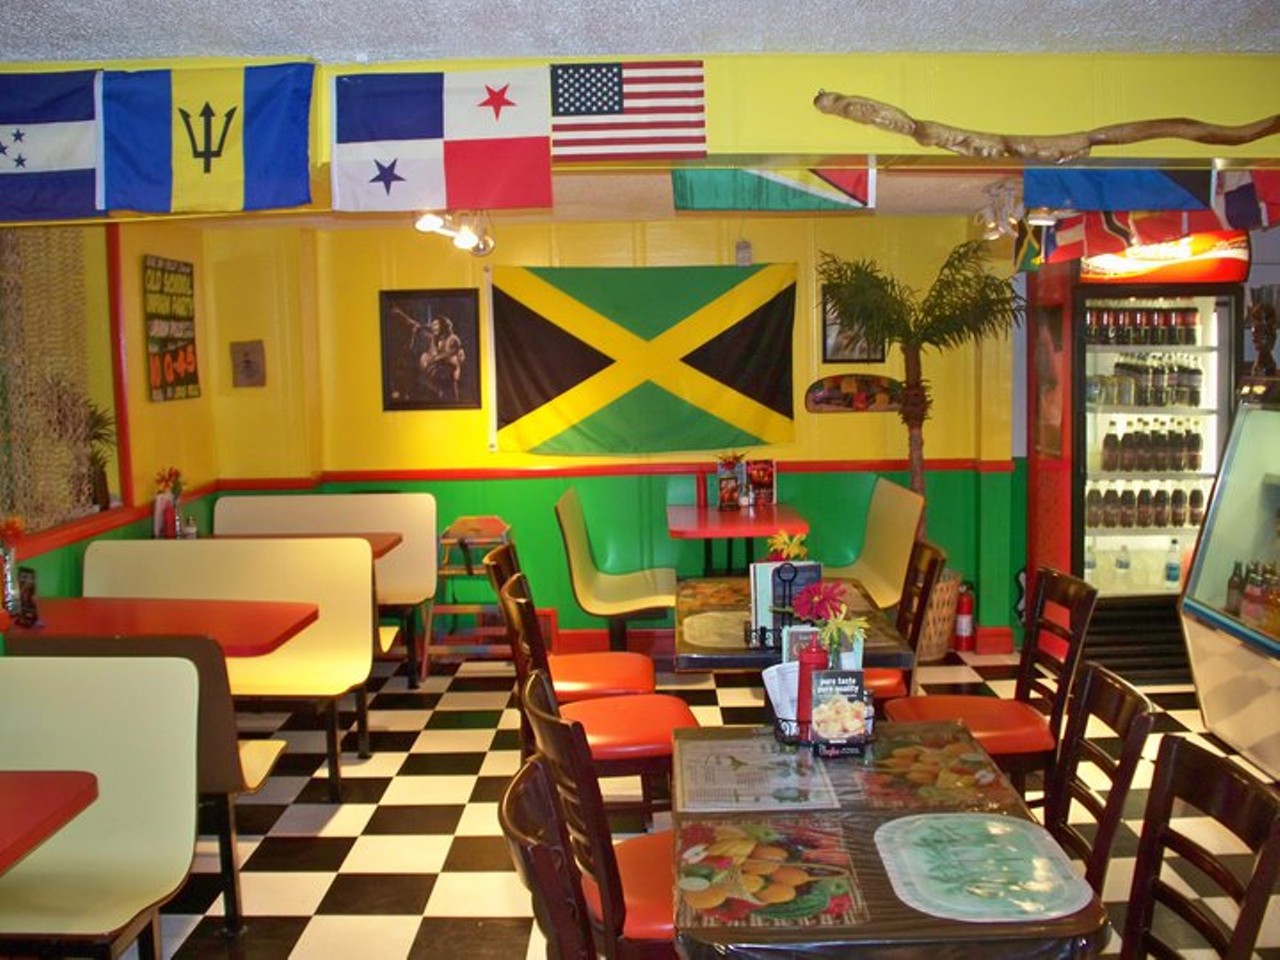 Jamaican Jerk Pit
314 S. Thayer St.; 734-585-5278;  jamaicanjerkpit.com 
The interior of this small space is brightly colored and lined with the flags of Caribbean countries. While it is take-out only, its authenticity is unmatched.